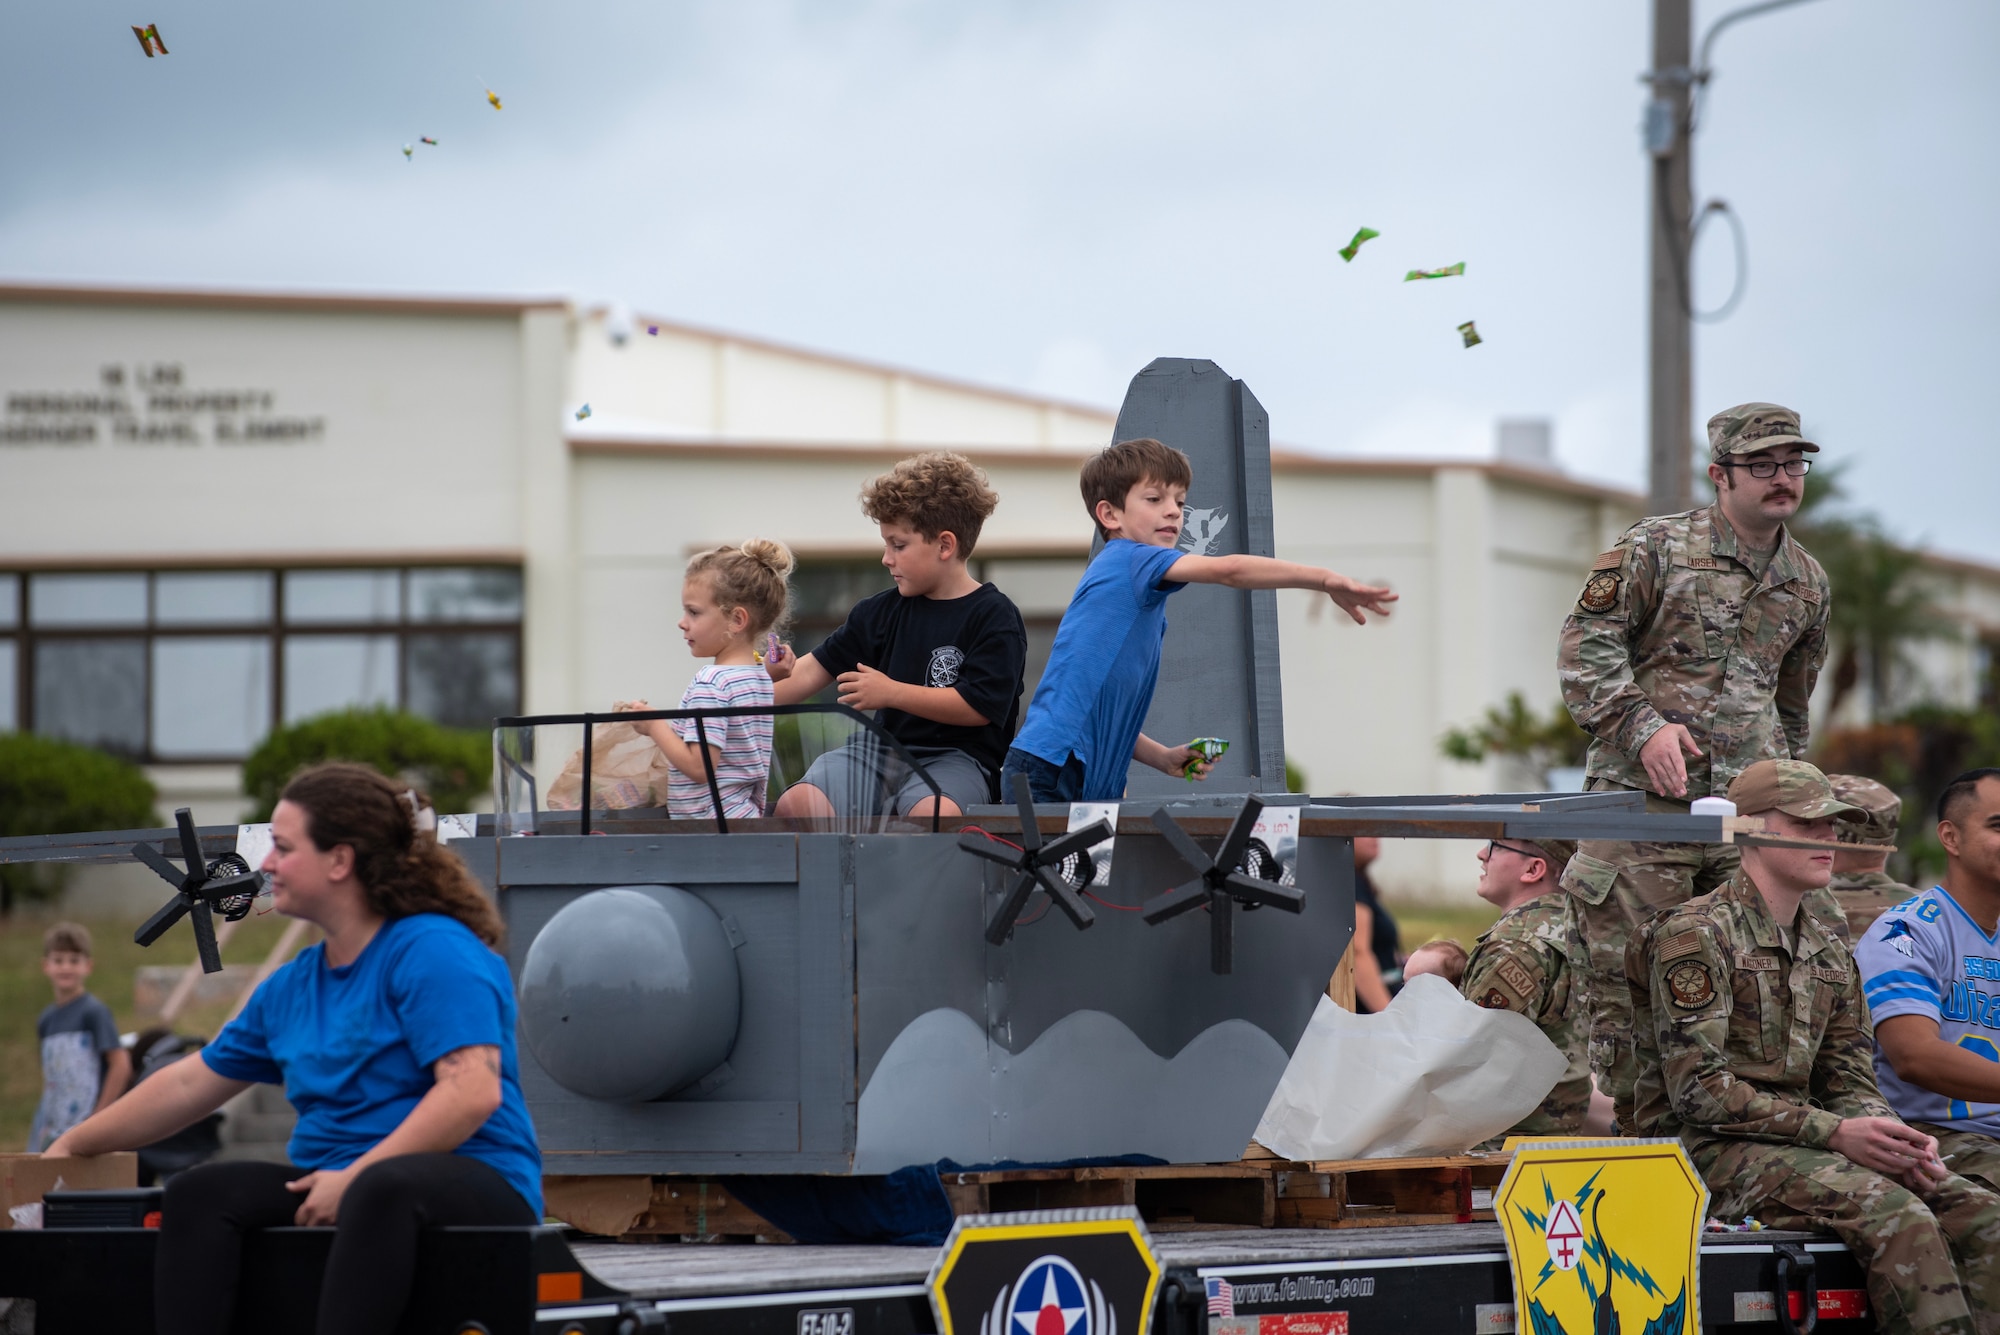 Kids throw candy from a parade float during a Veteran's day parade.